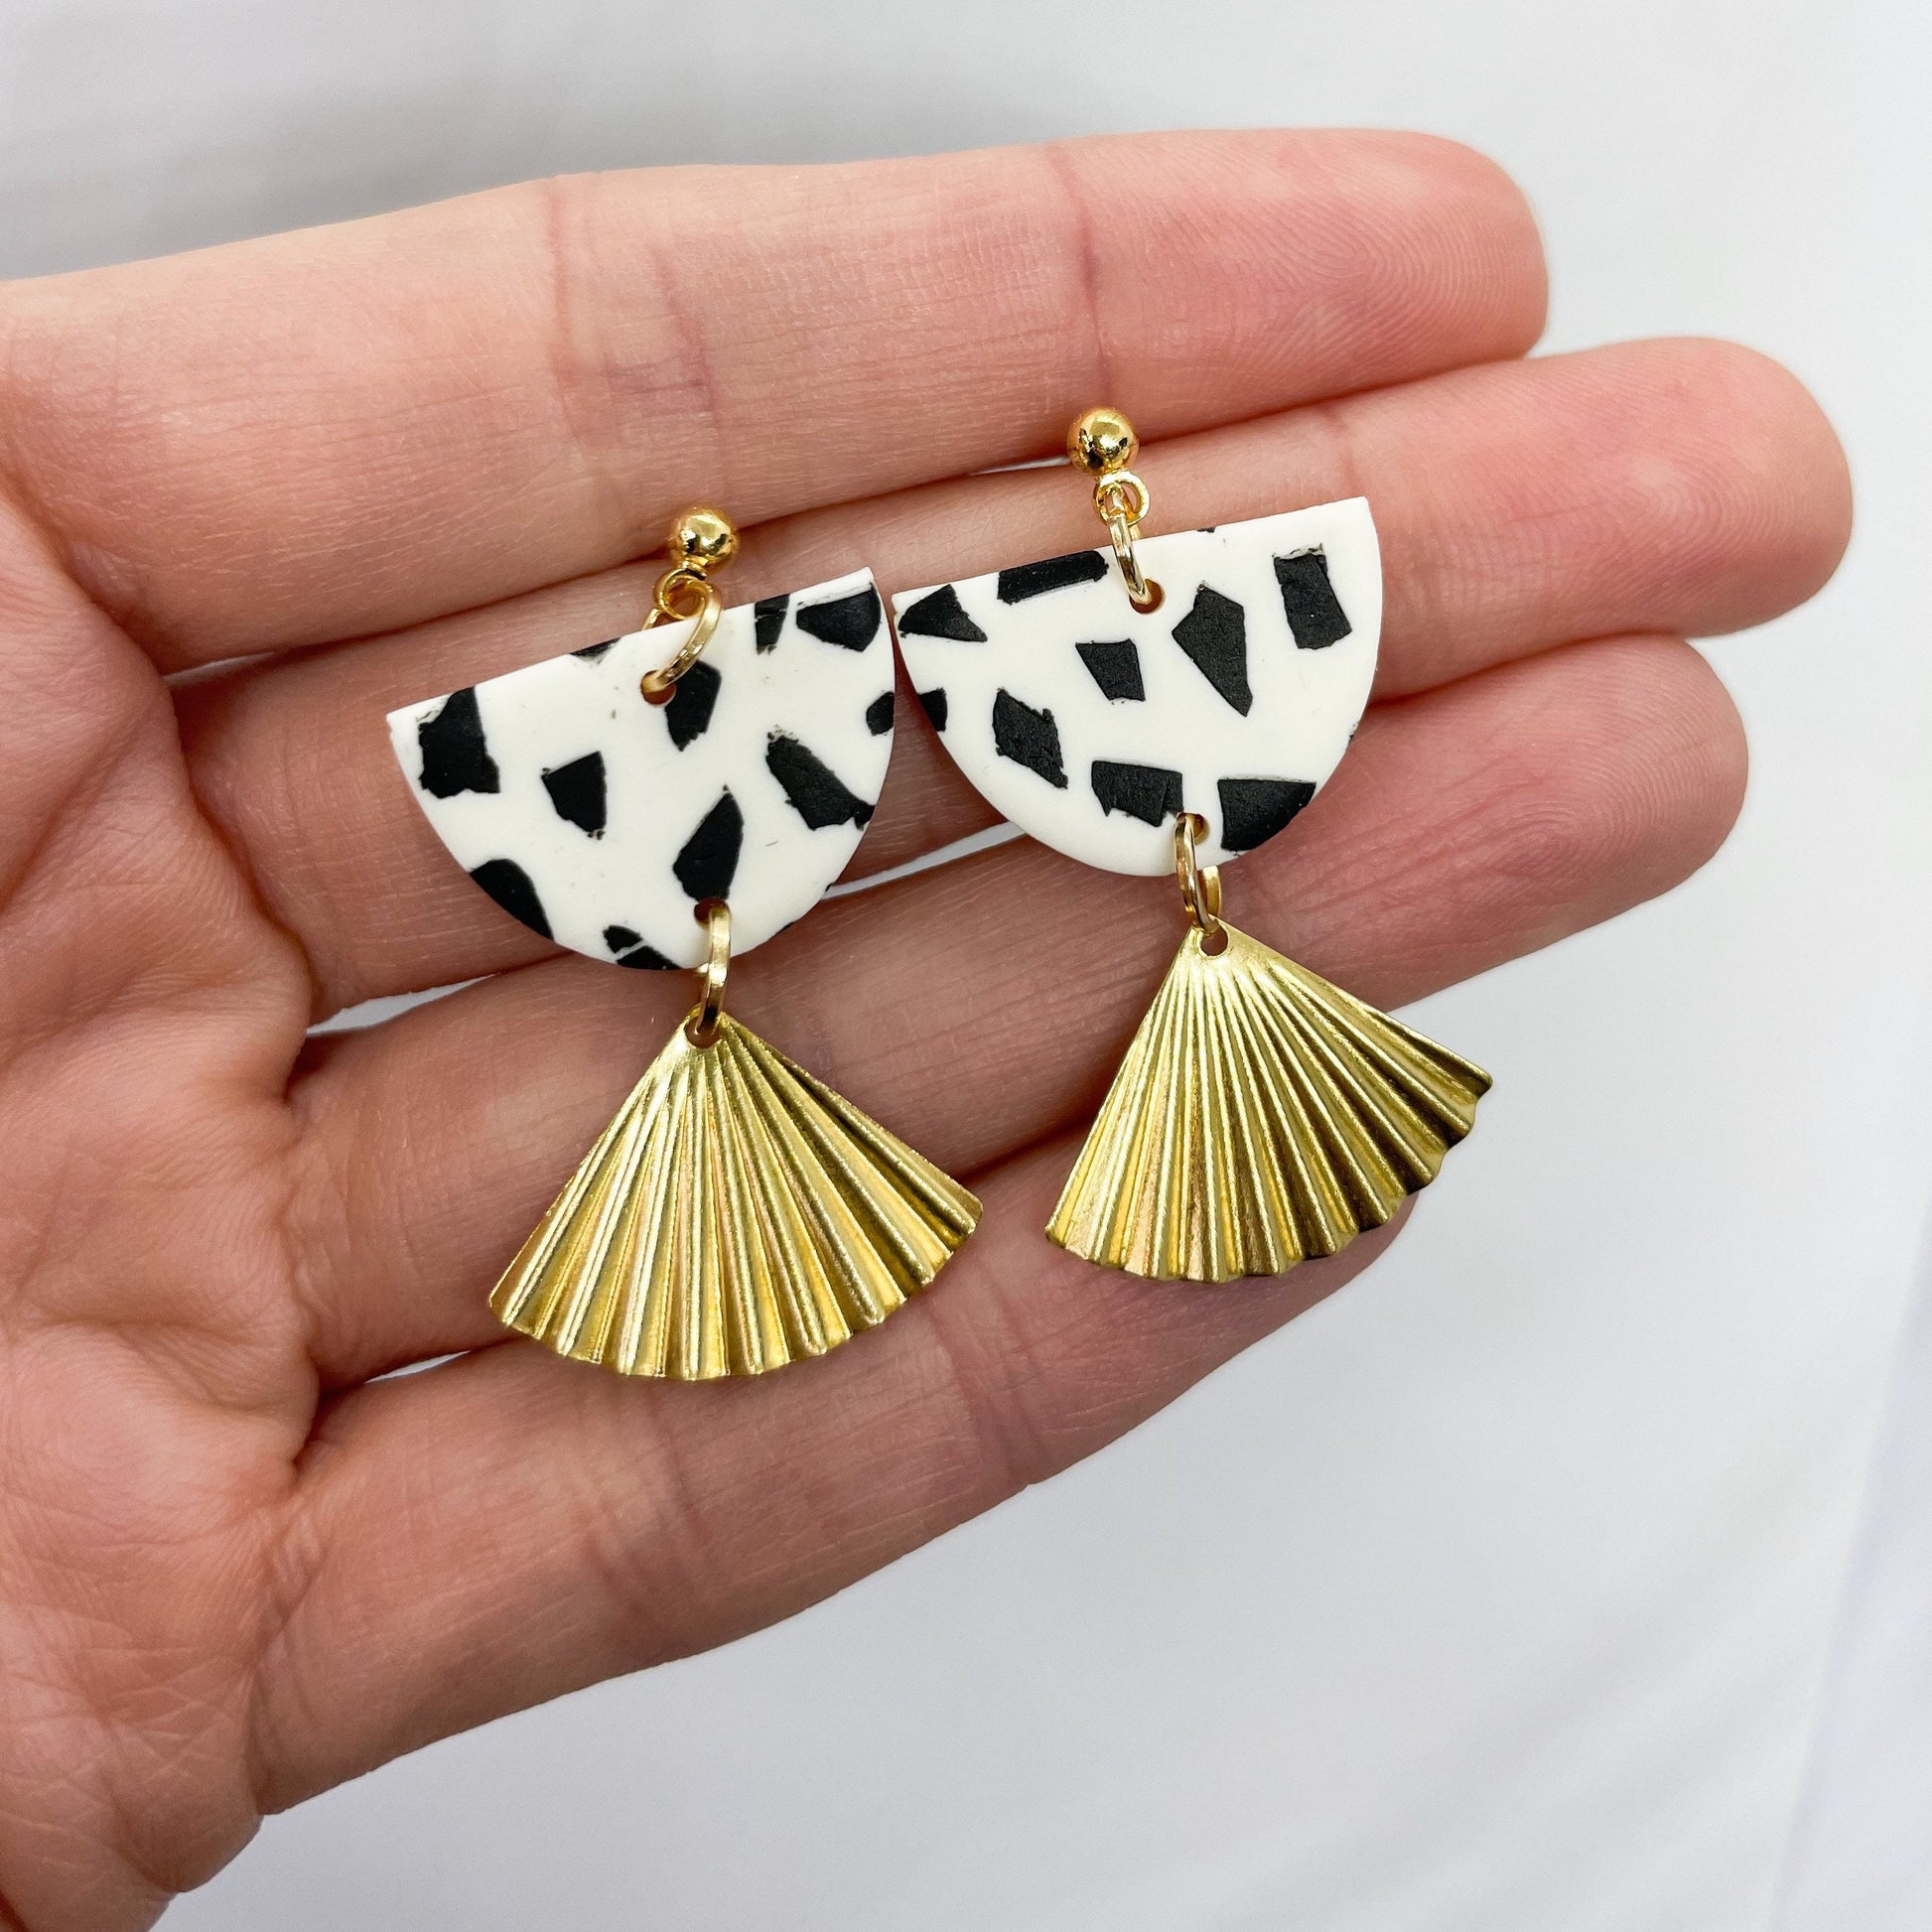 Dangle polymer clay earrings, Dalmatian print, Mother’s Day gift, post box gift, best friend birthday gift, girlfriend gift,